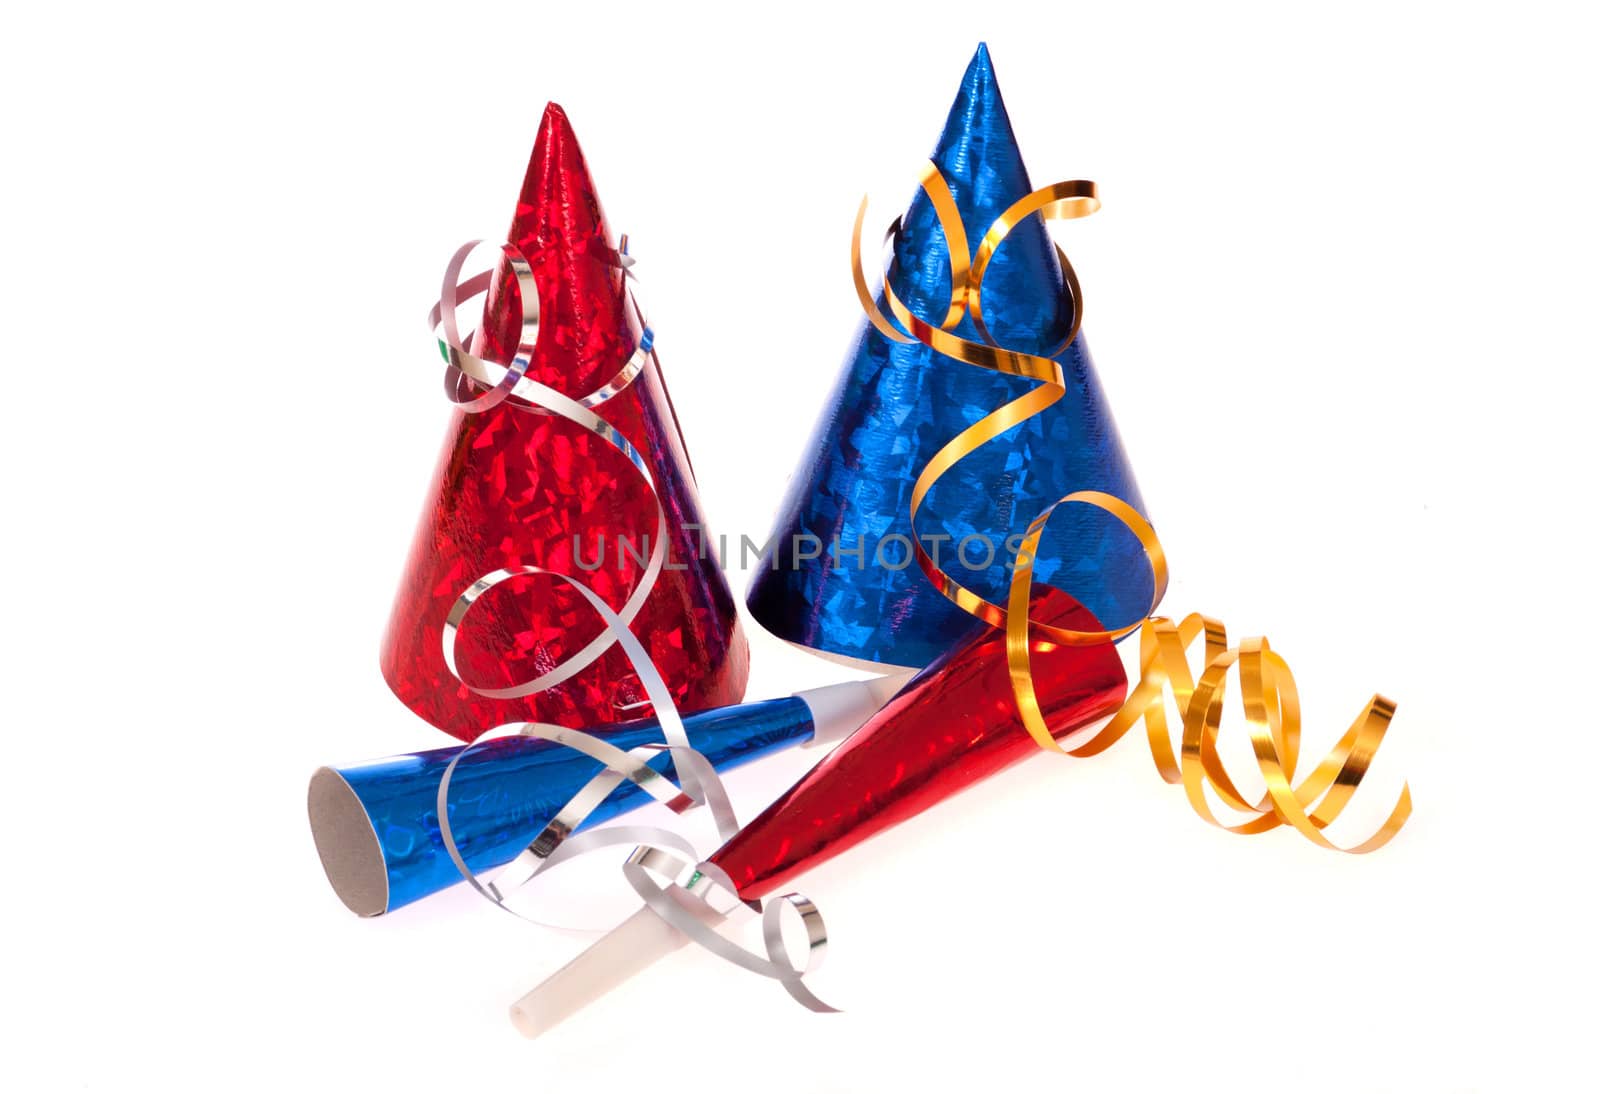 party items, photo on the white background 